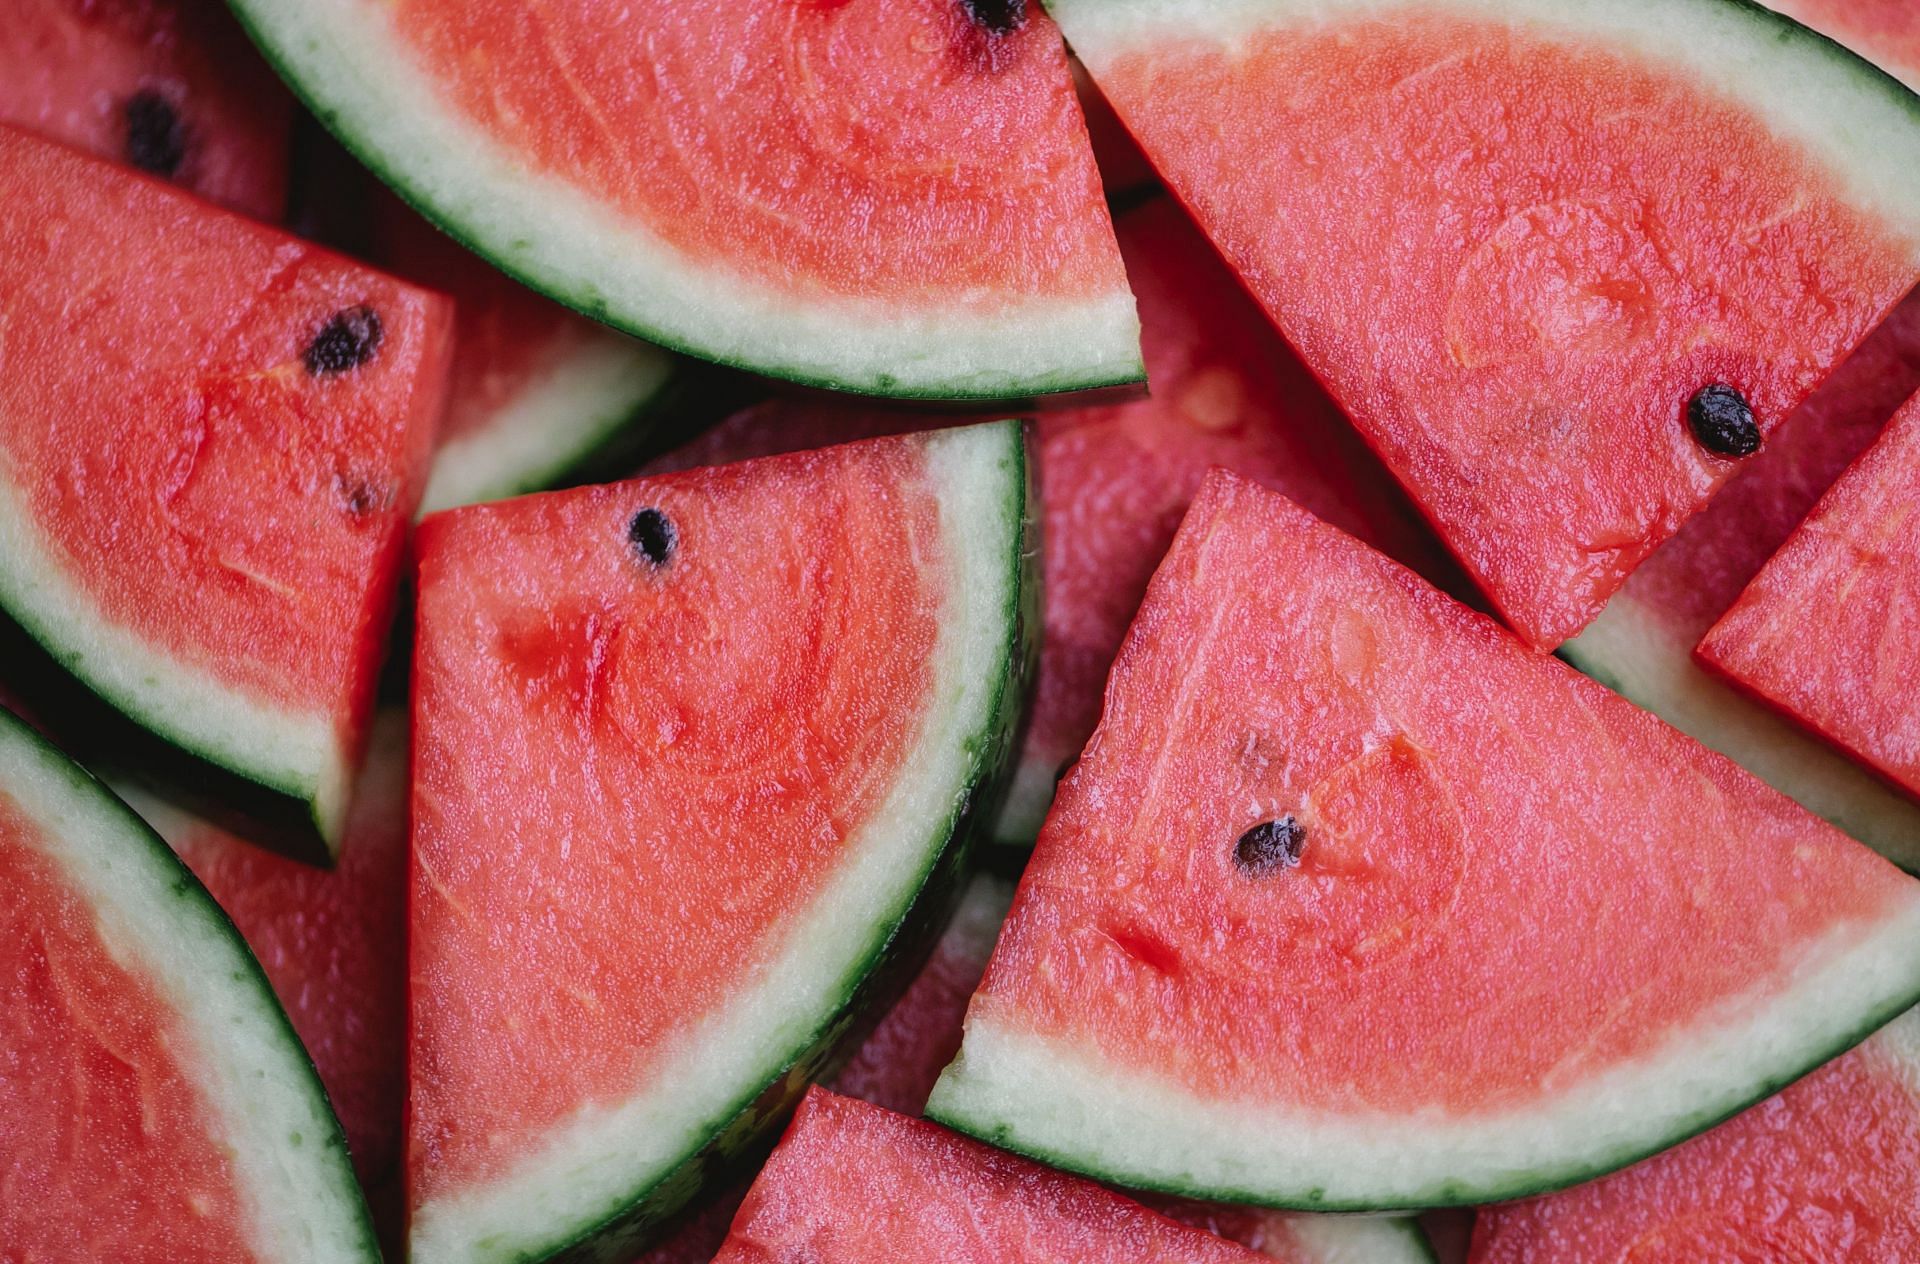 Watermelon may help reduce cancer risk due to its antioxidant properties (Image via Pexels)